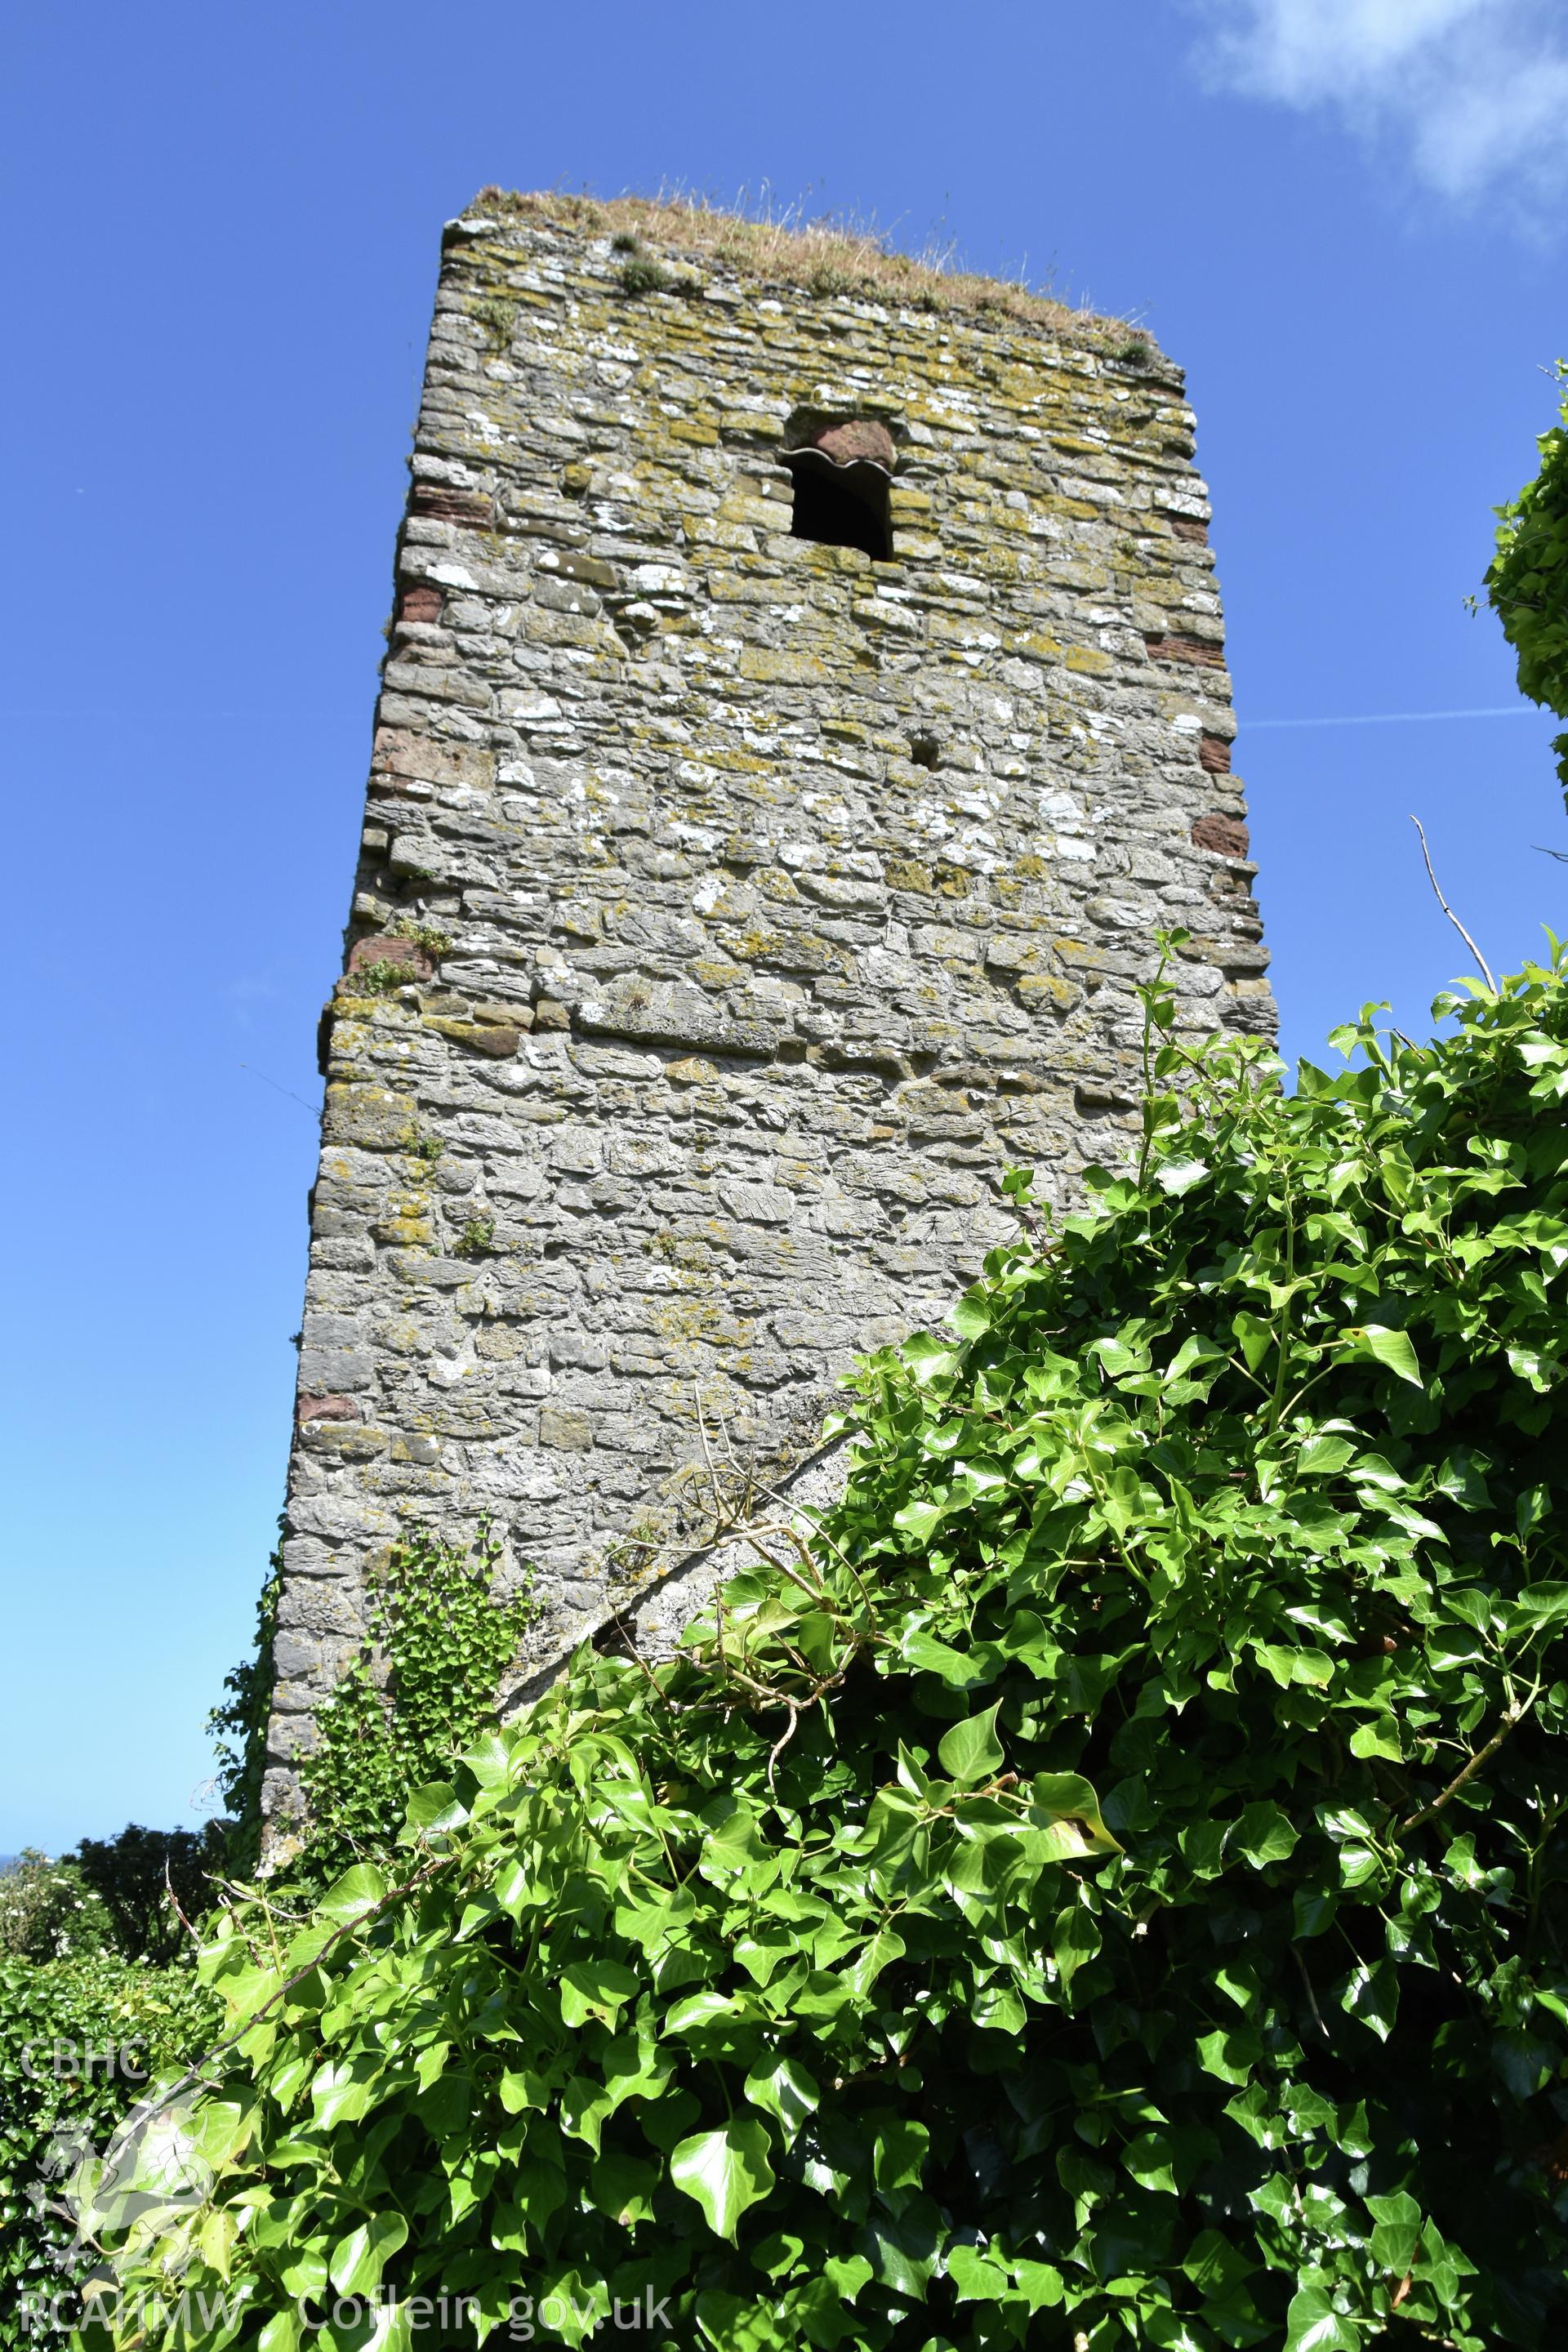 Investigator's photographic survey of the church on Puffin Island or Ynys Seiriol for the CHERISH Project. View showing the post medieval cottage on the south side of the tower, occupying the former transept of the church. ? Crown: CHERISH PROJECT 2018. Produced with EU funds through the Ireland Wales Co-operation Programme 2014-2020. All material made freely available through the Open Government Licence.